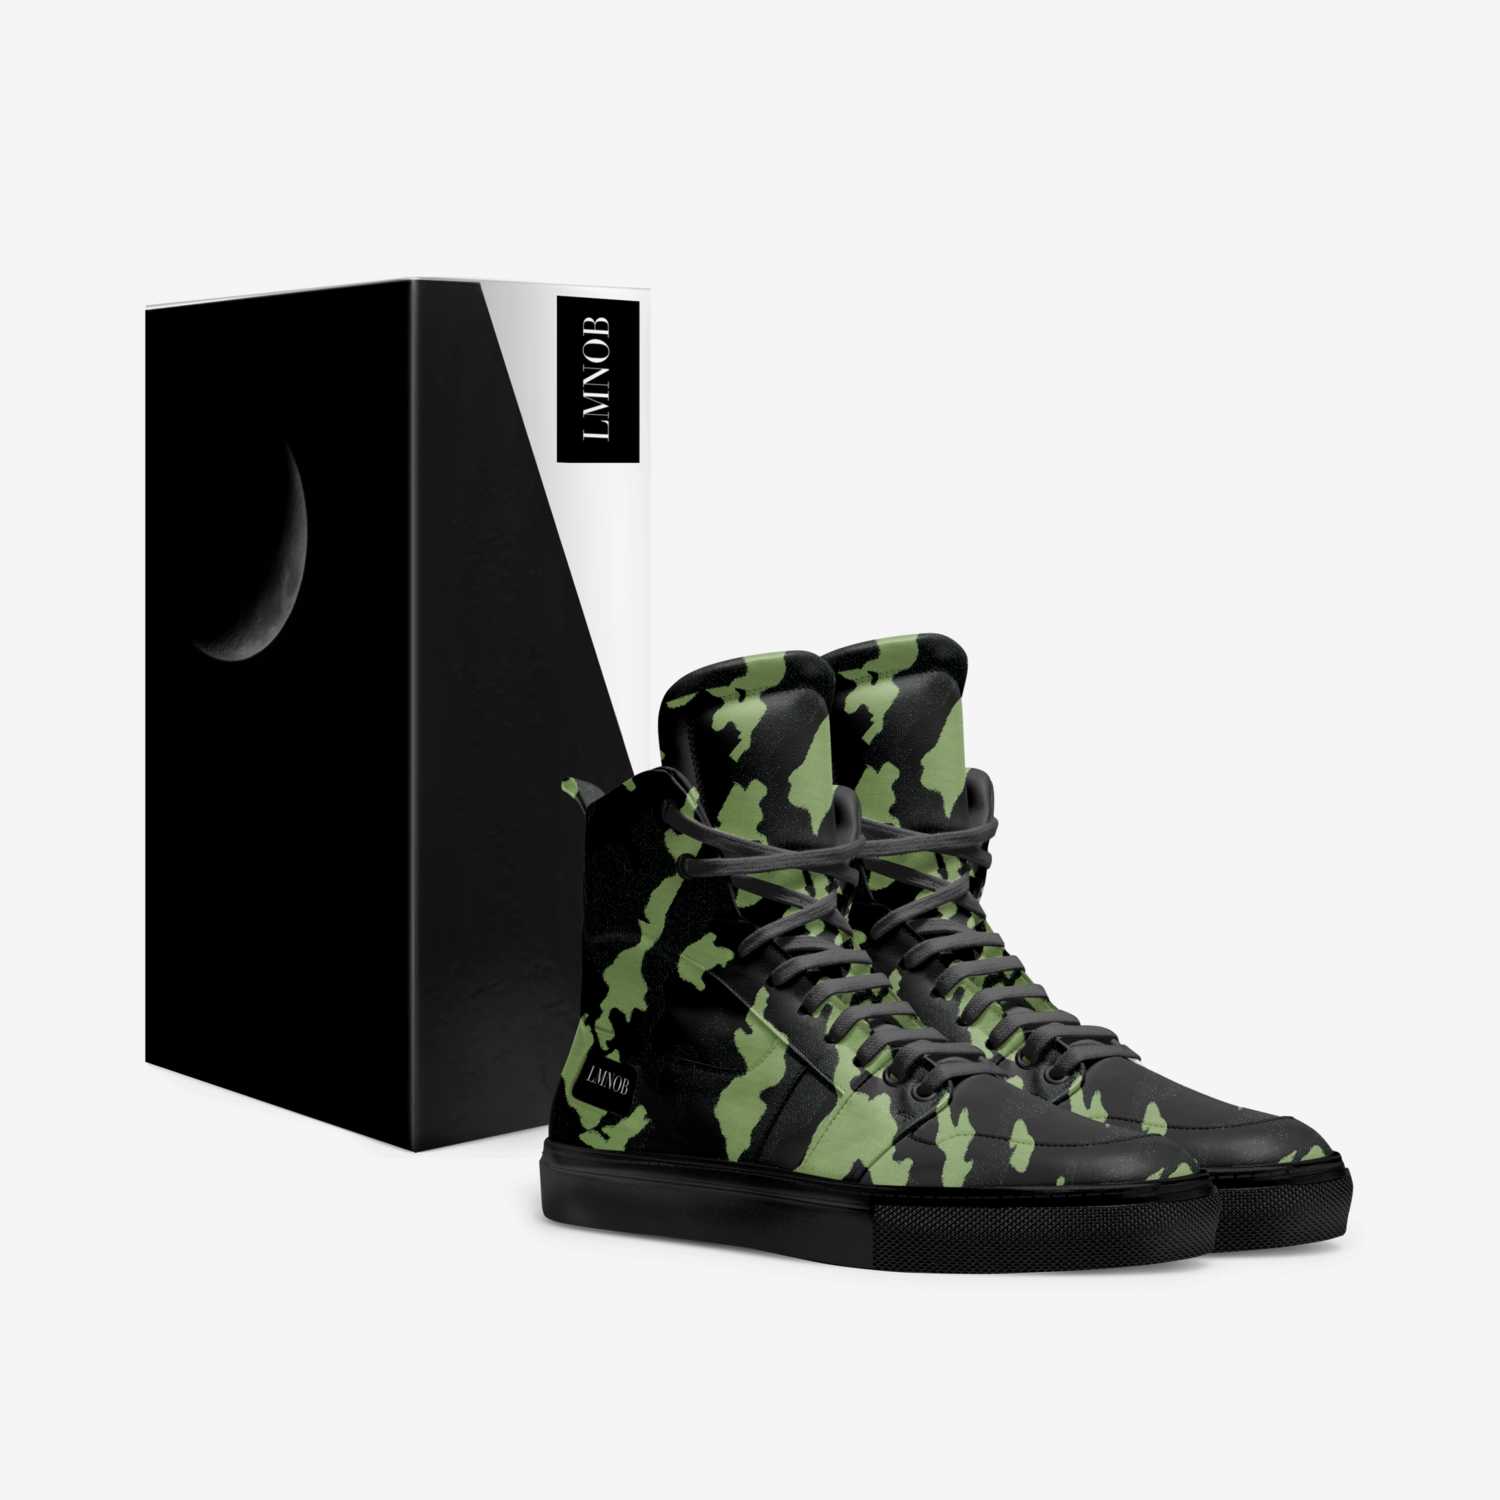 JUNGLE custom made in Italy shoes by Lawrence Blackwell | Box view